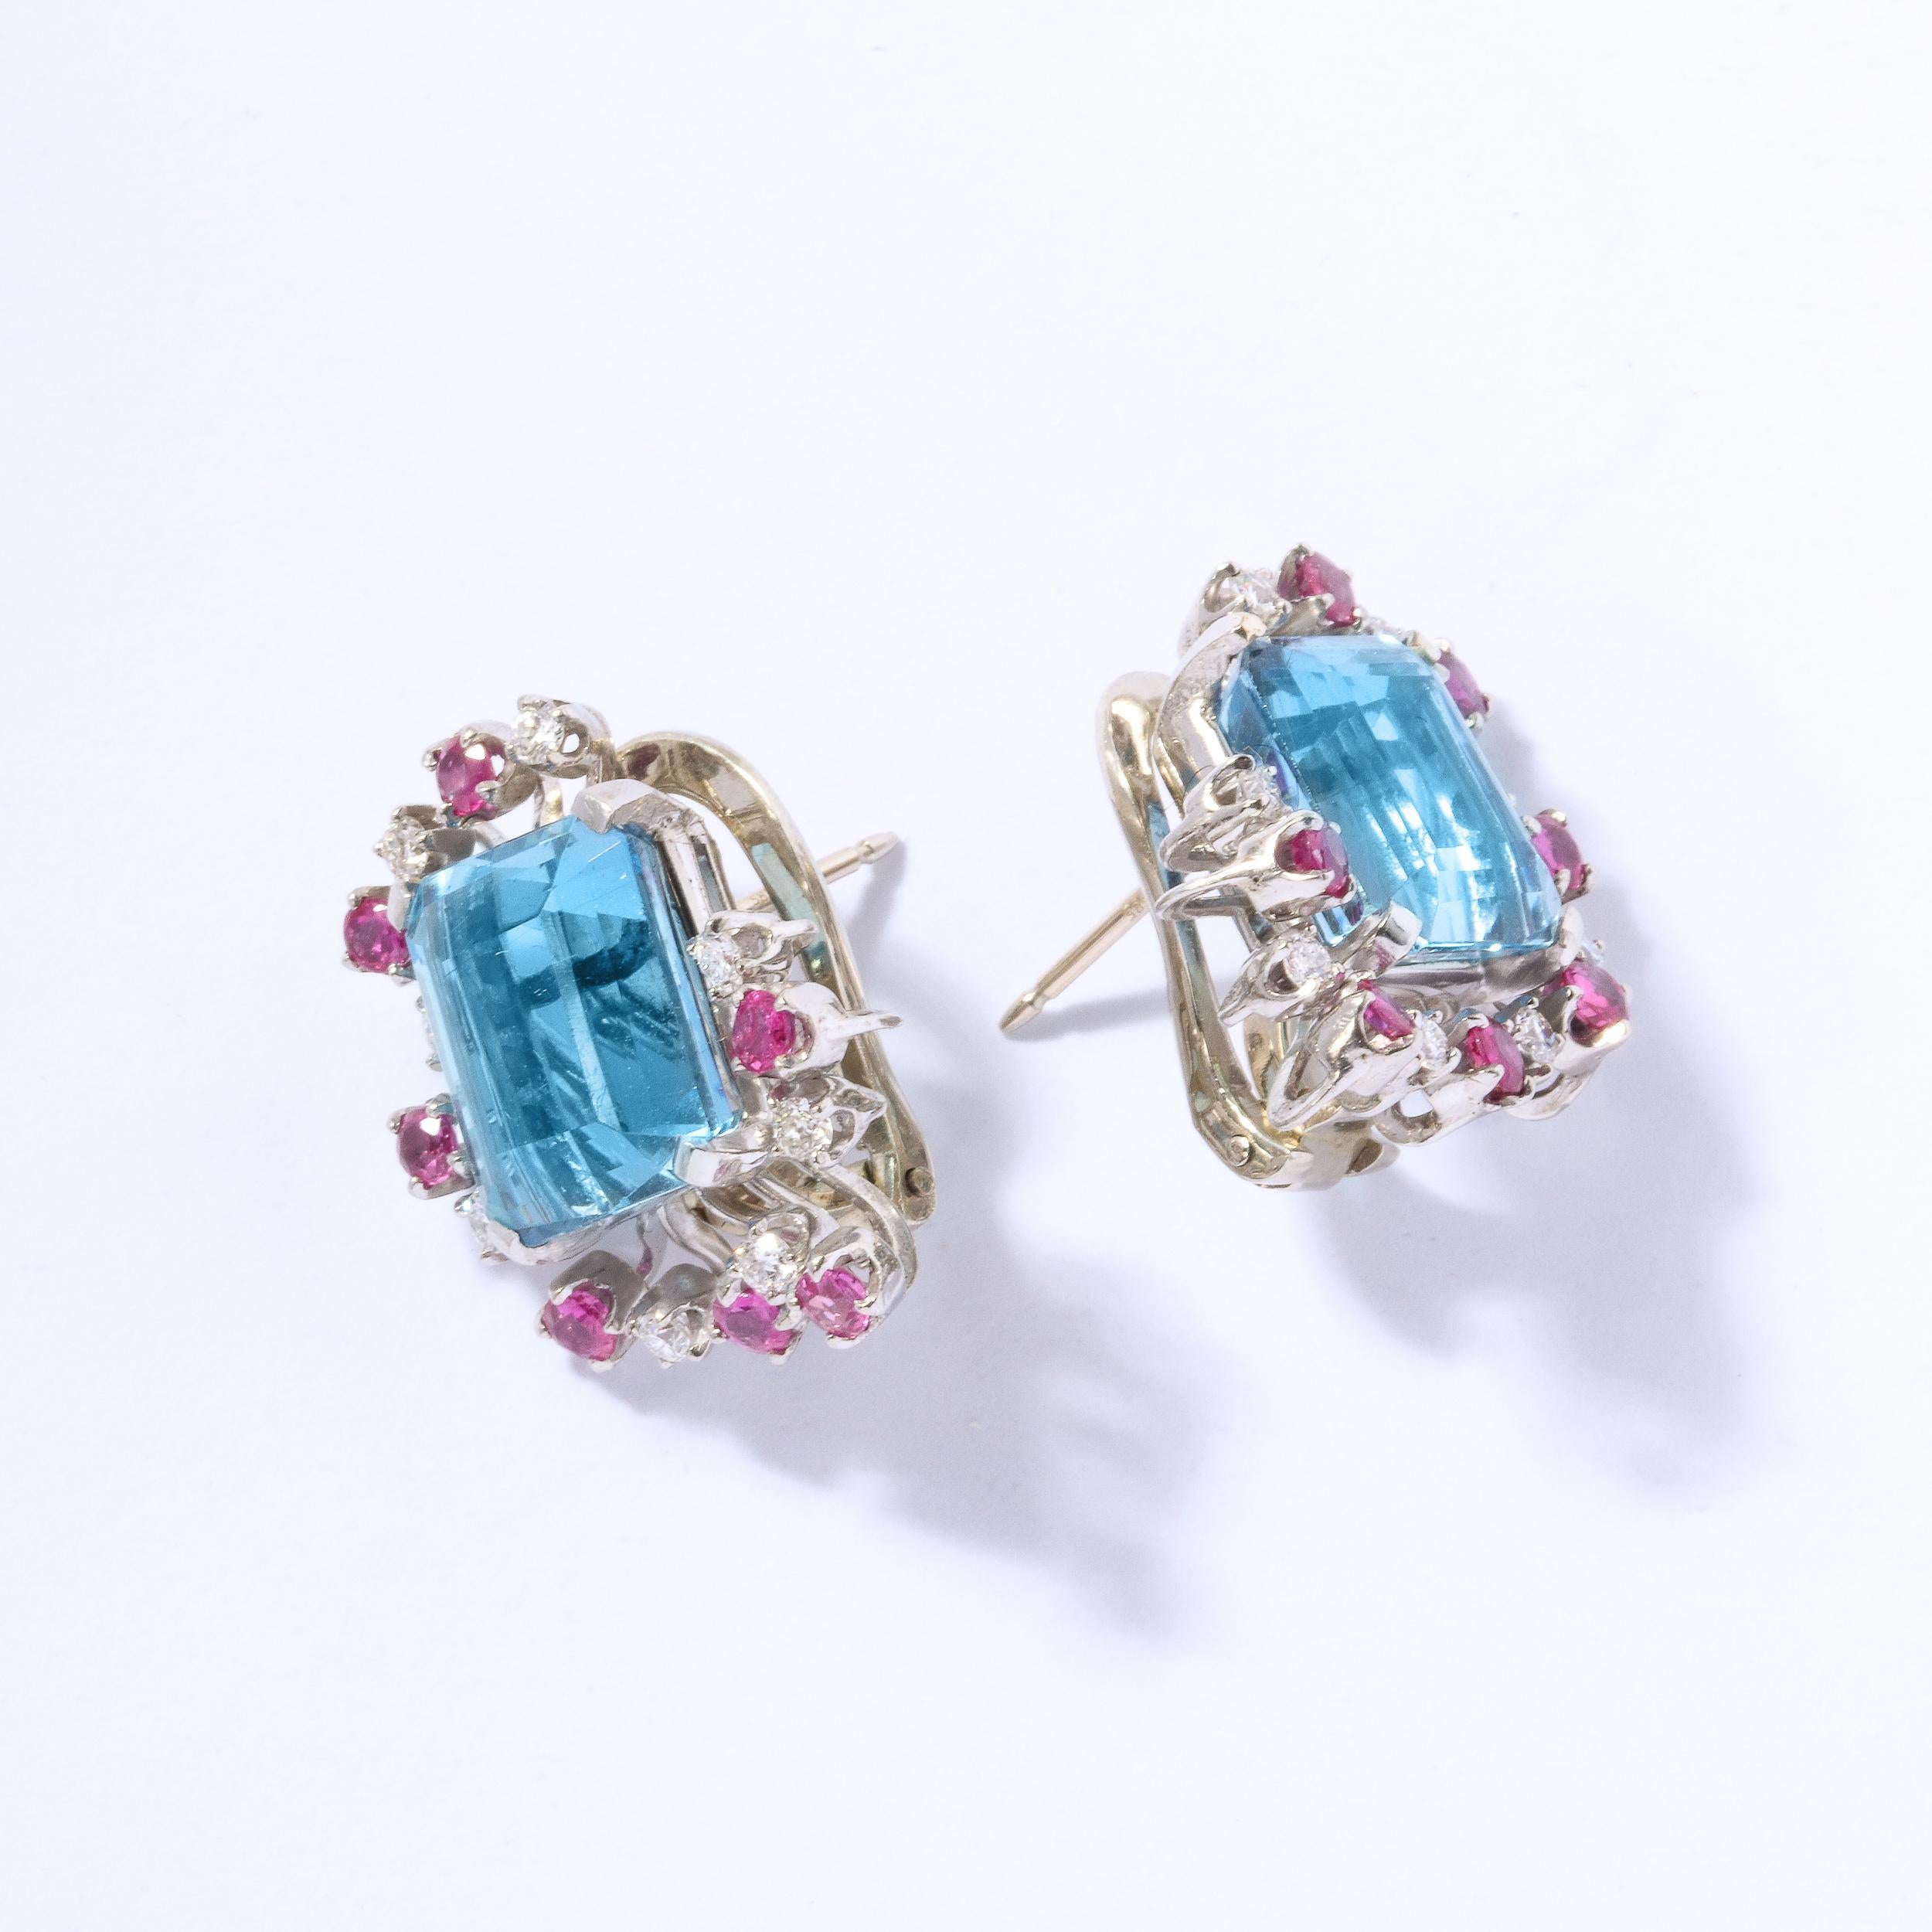 1940s 12 Carat Aquamarine and 14K White Gold Earrings with Diamonds and Rubies For Sale 7